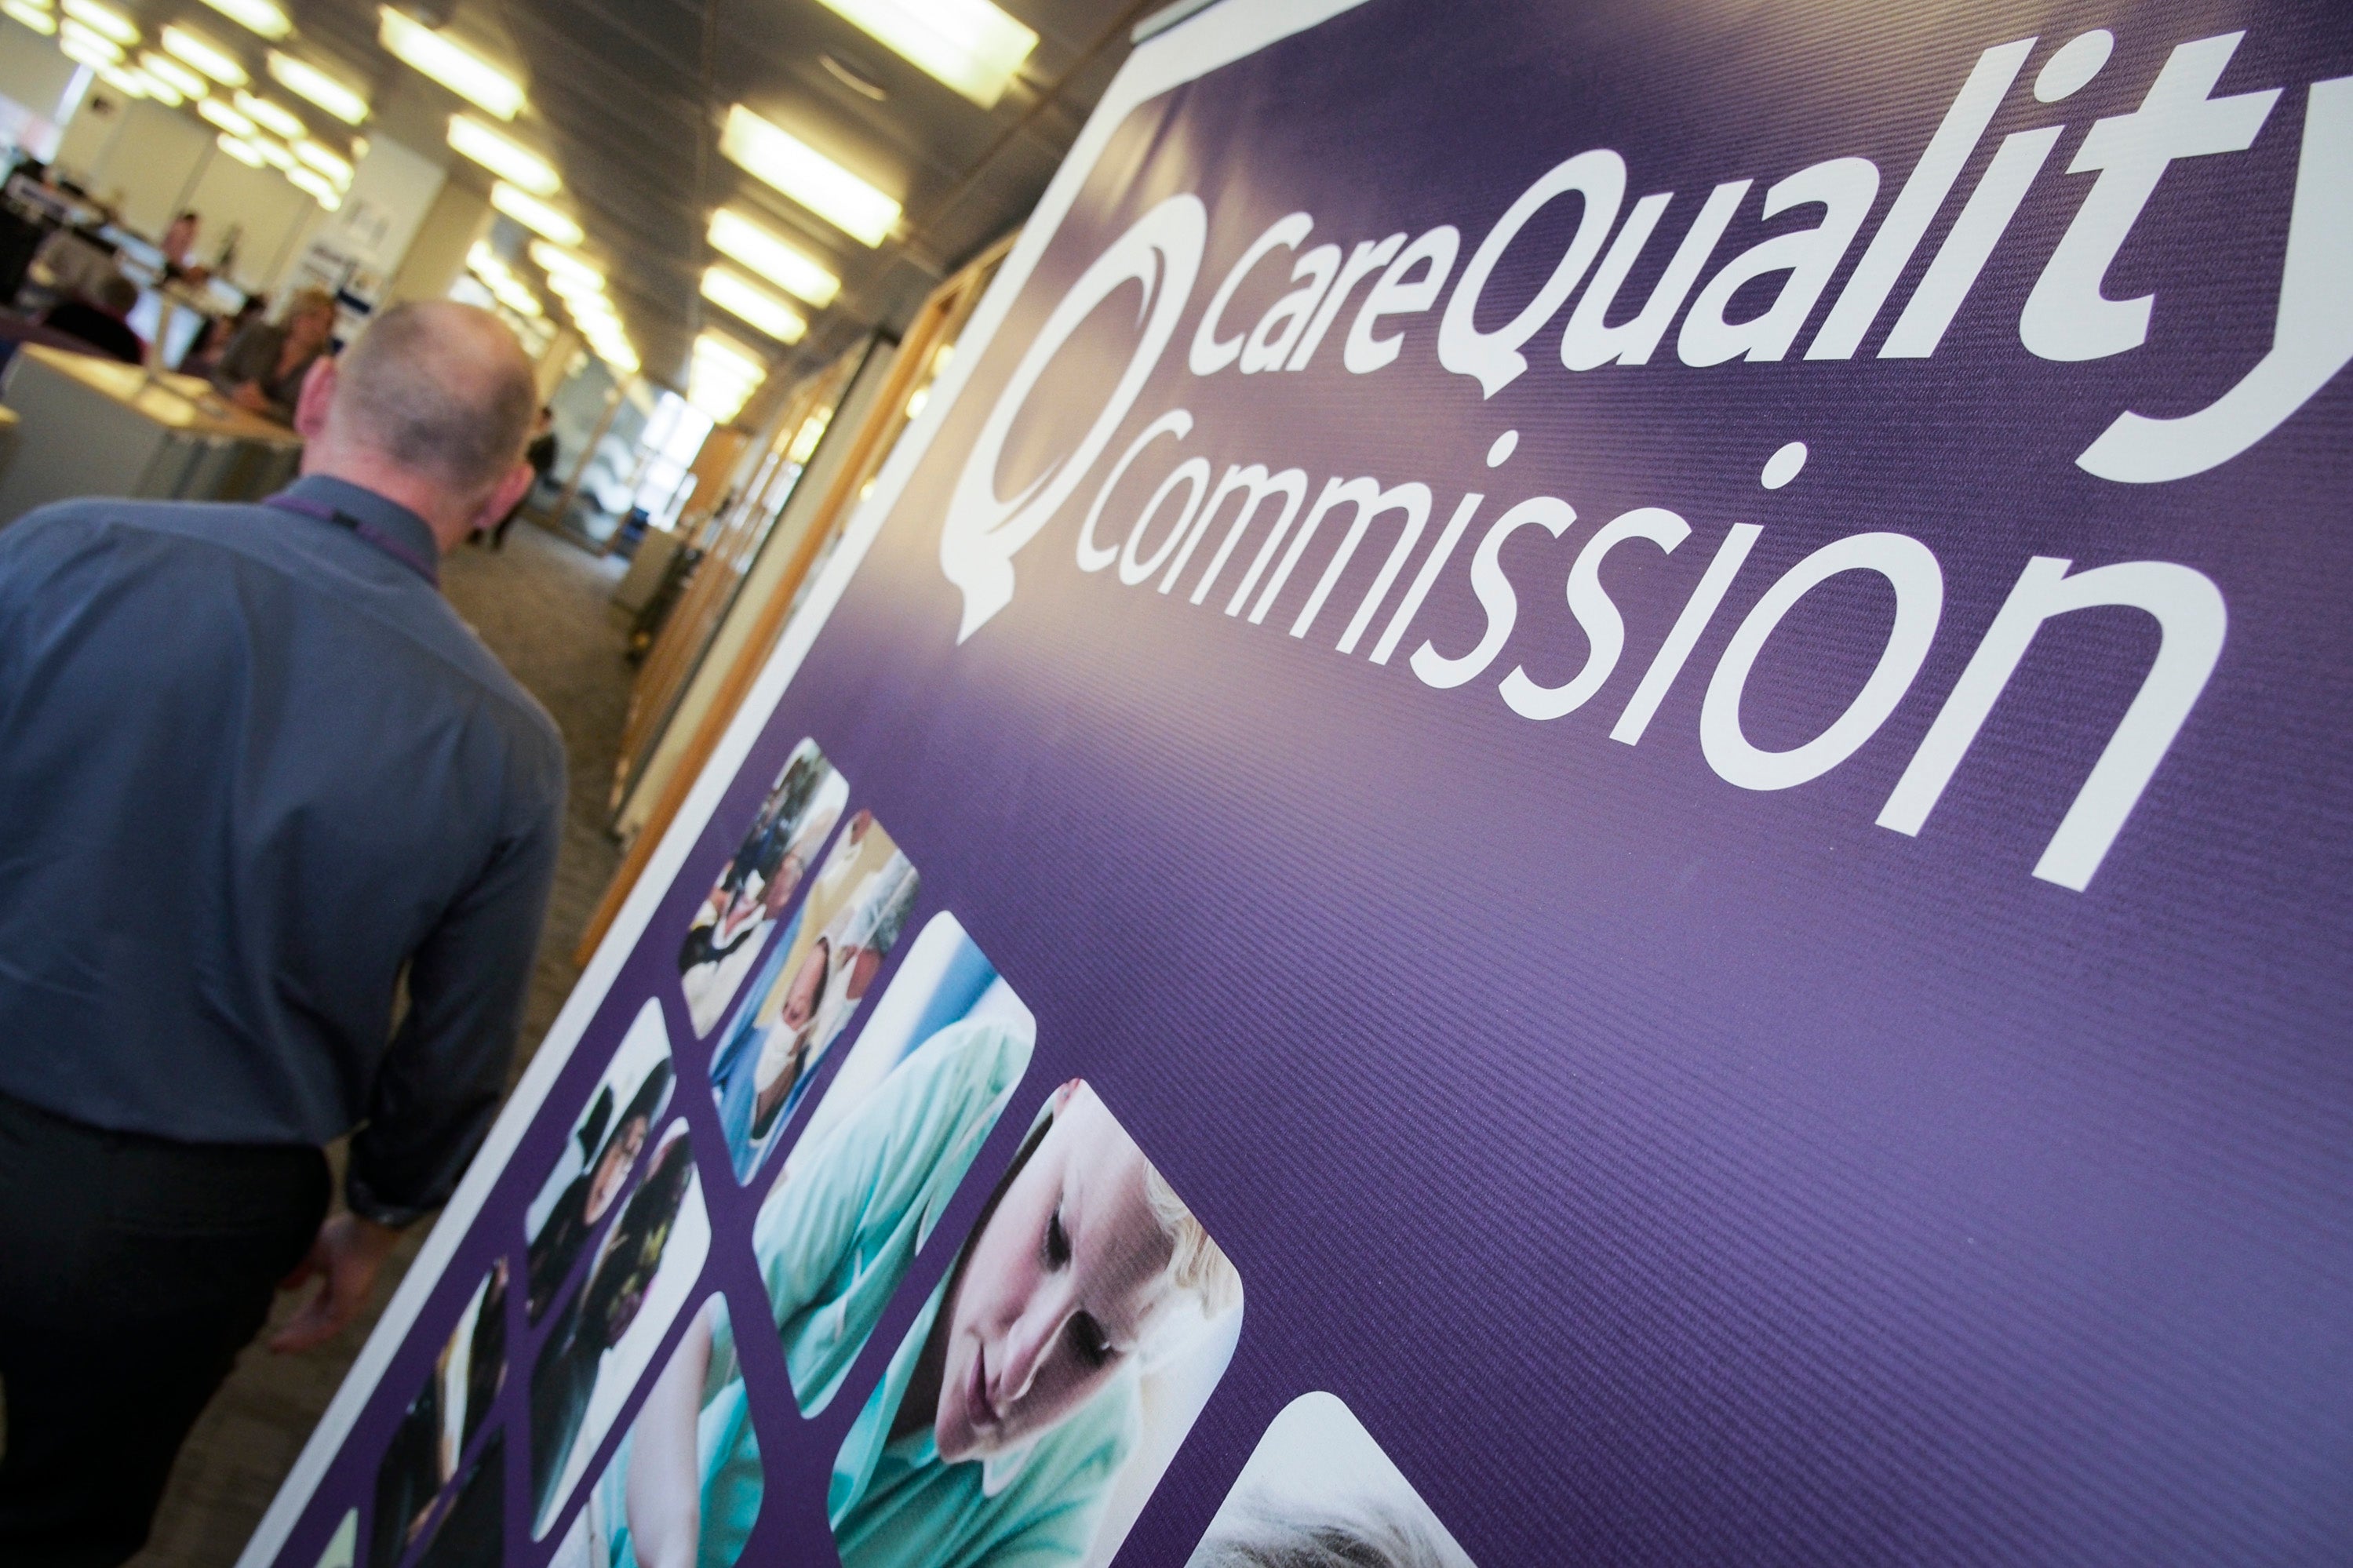 CQC publishes its annual state of care report